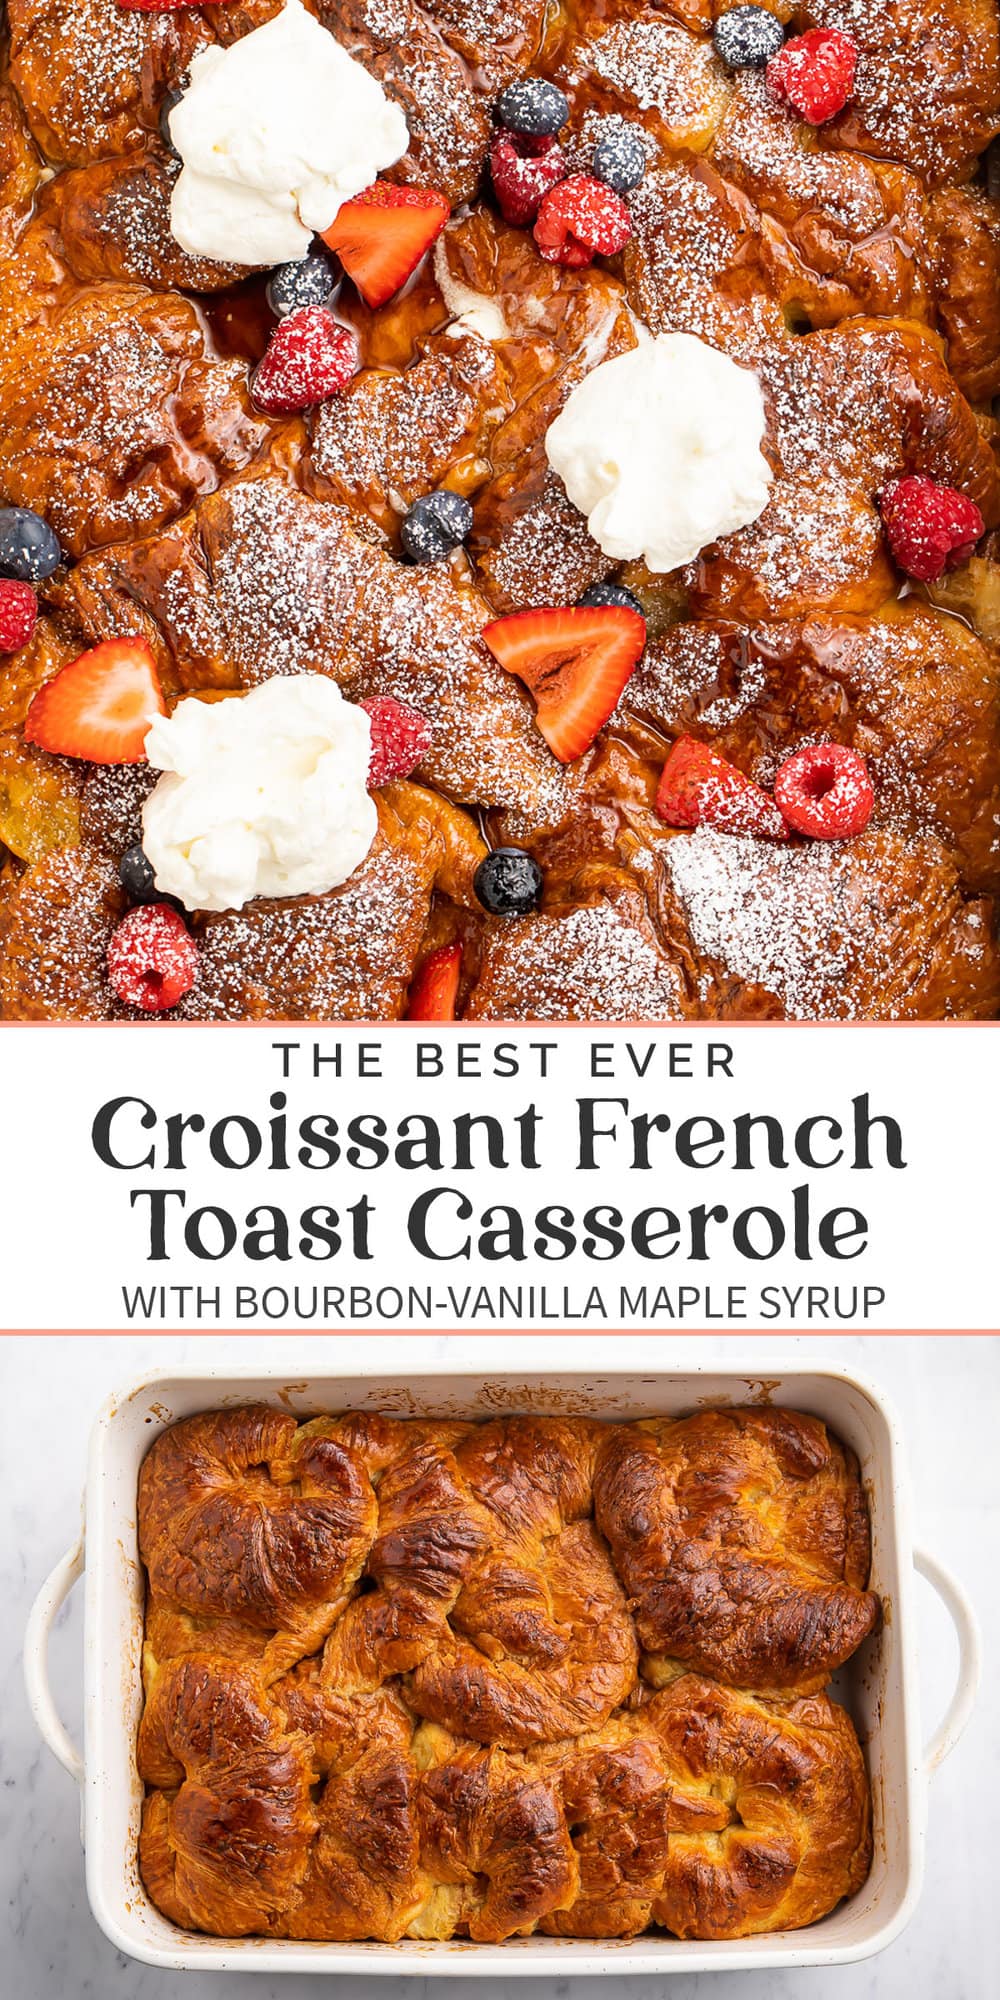 Pin graphic for croissant french toast casserole.